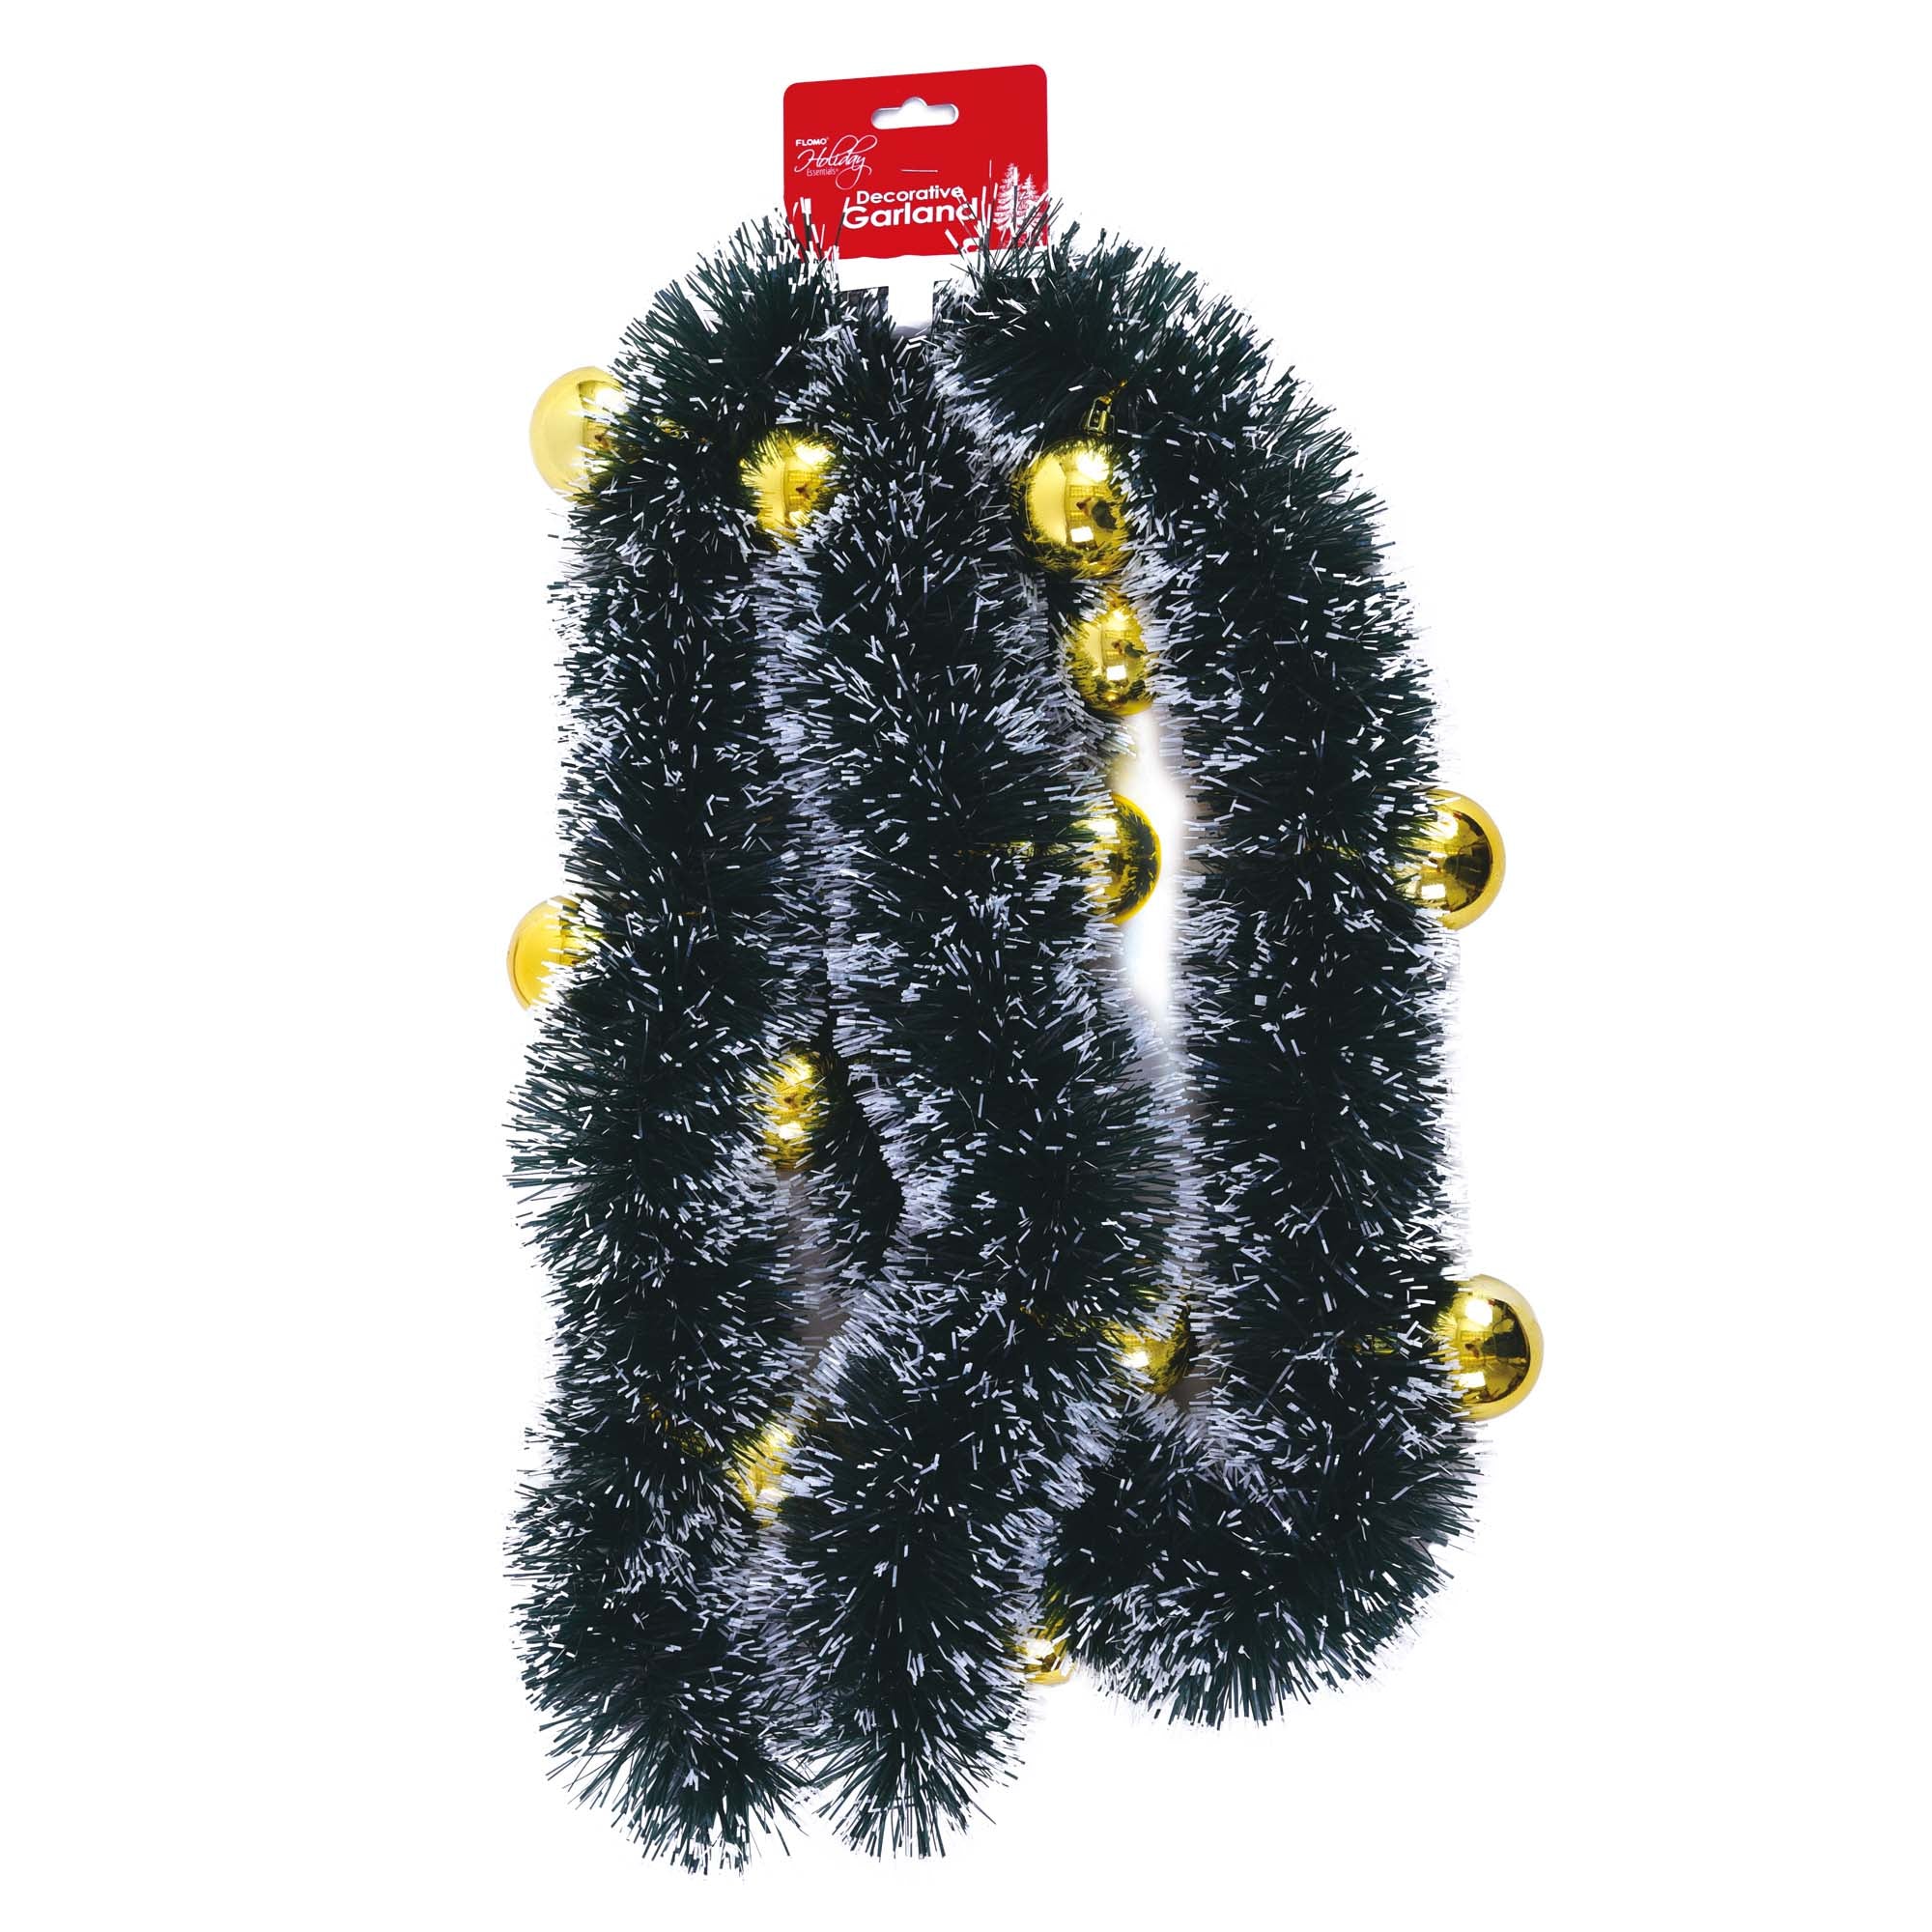 15 Foot Tinsel Garland for Christmas Decorations - Non-Lit Holiday Dec –  Celebrate A Holiday